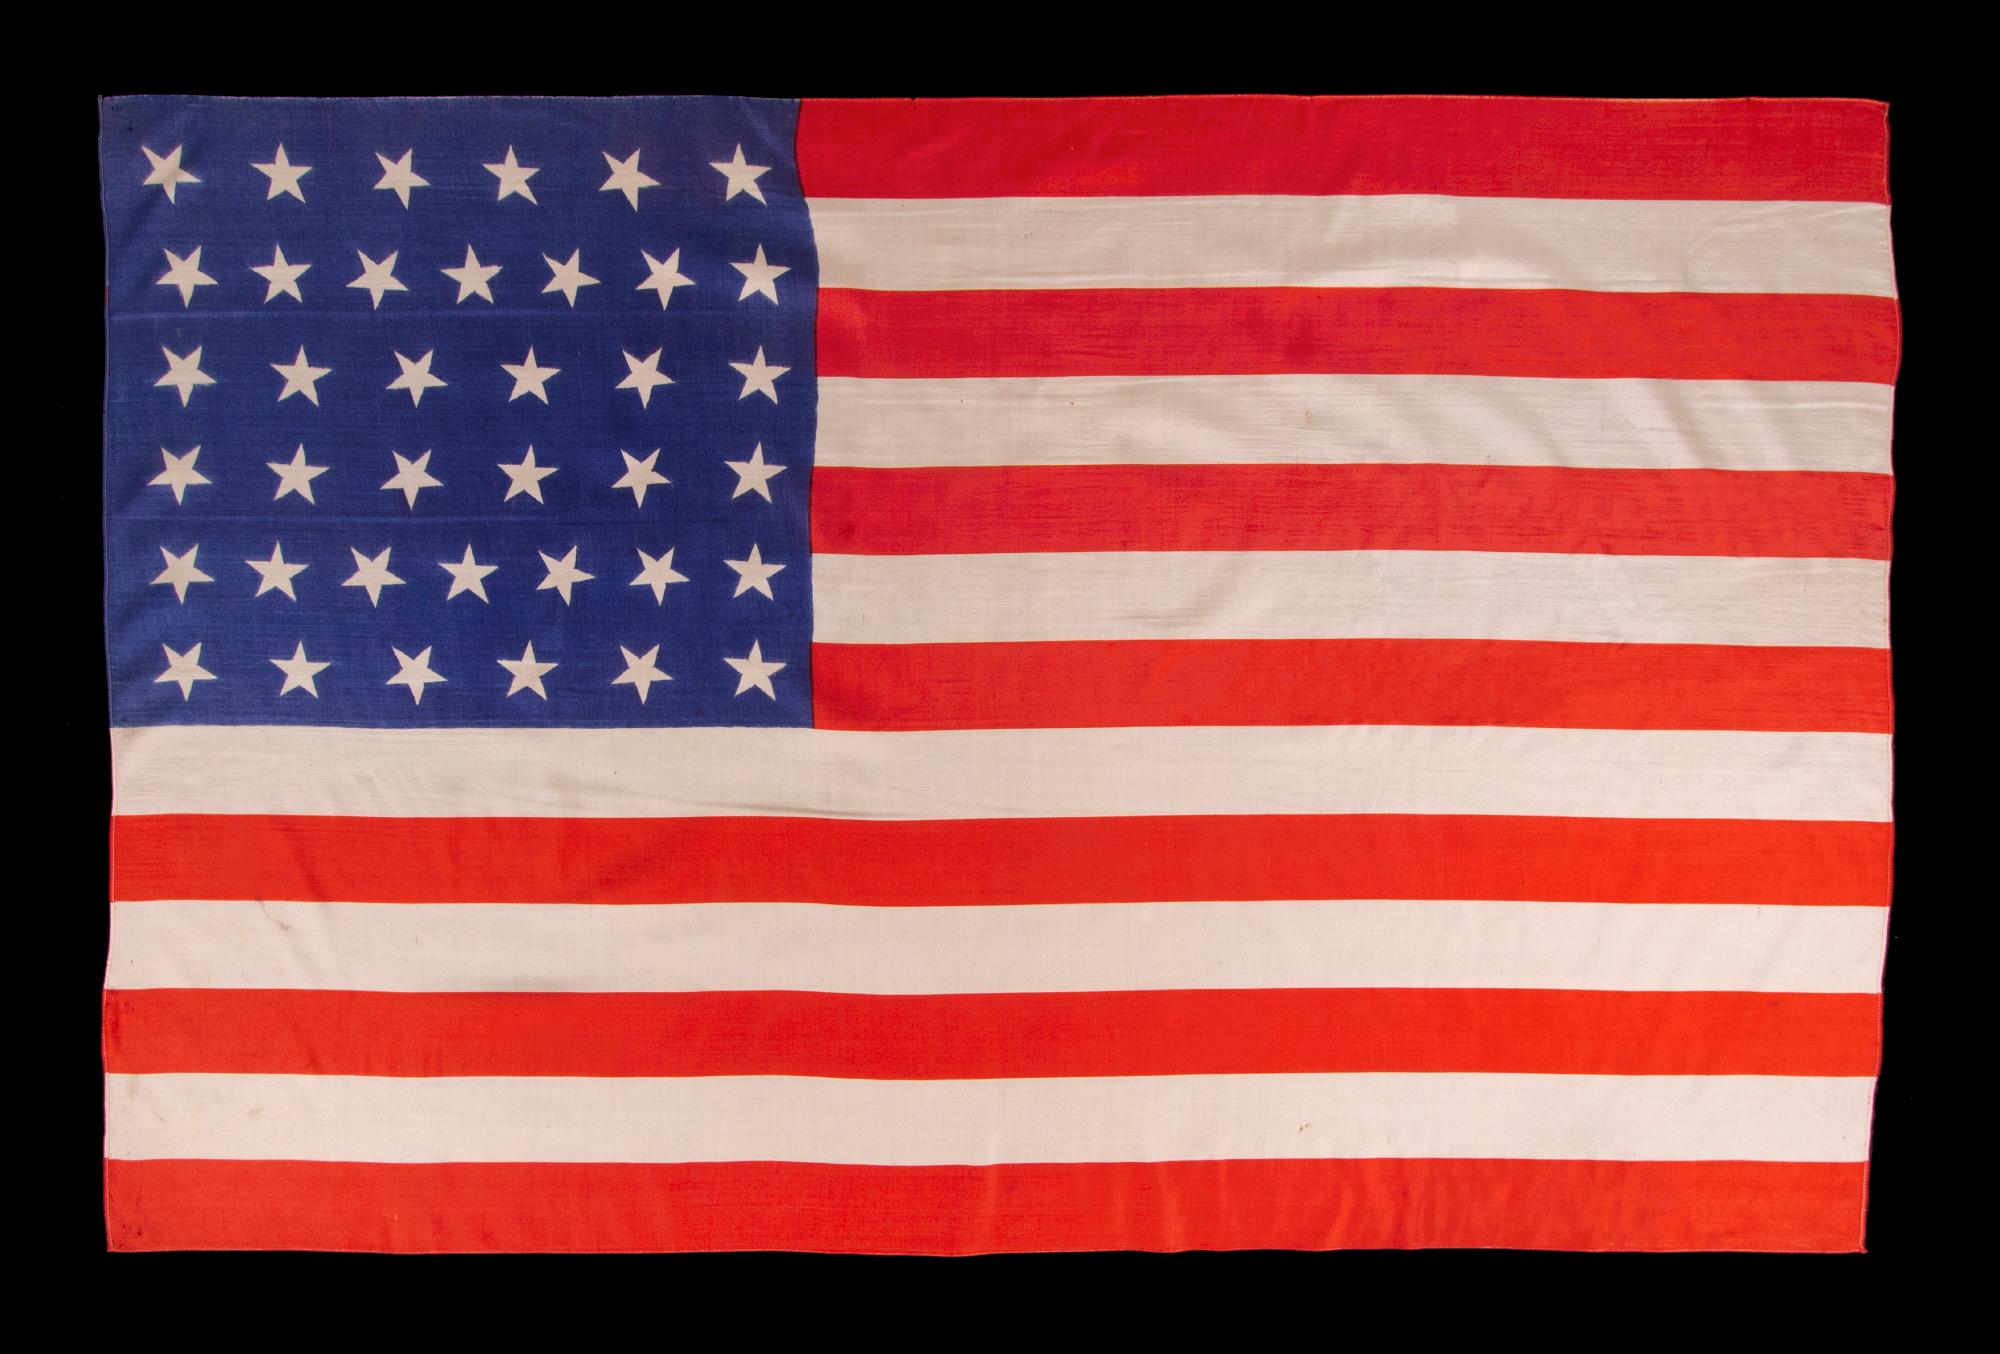 38 star antique American parade flag with scattered star orientation, made of silk, with generous scale and vivid colors, Colorado Statehood, 1876-1889

38 star American national parade flag, printed on silk. The stars are arranged in justified,